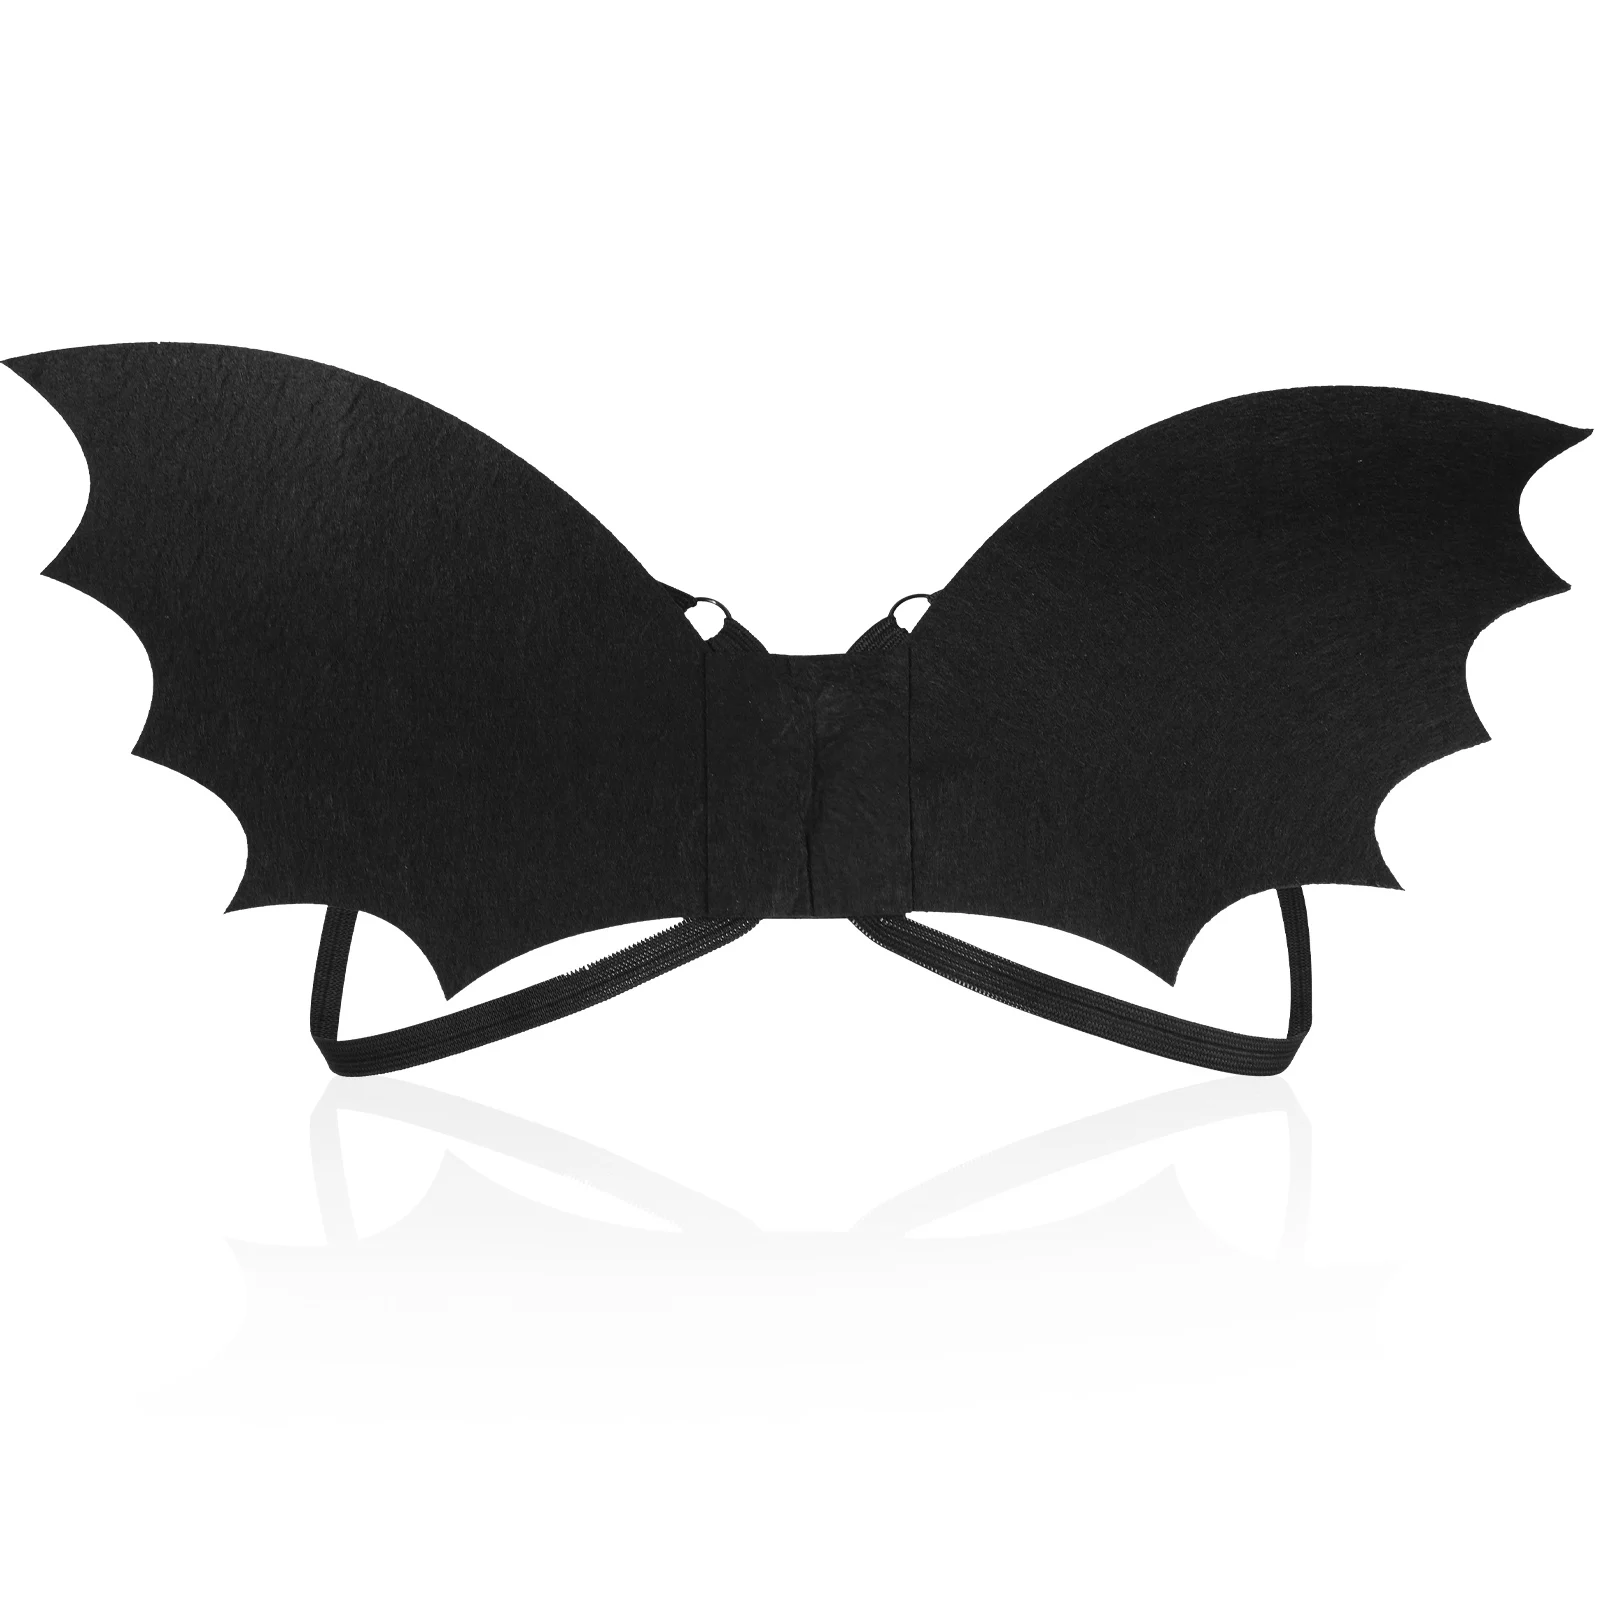 

Halloween Bat Wing Cosplay Costume Accessory Prop For Boys Girls Children'S Party Decor Bat Wings EVA Toy Cospel Ay Props